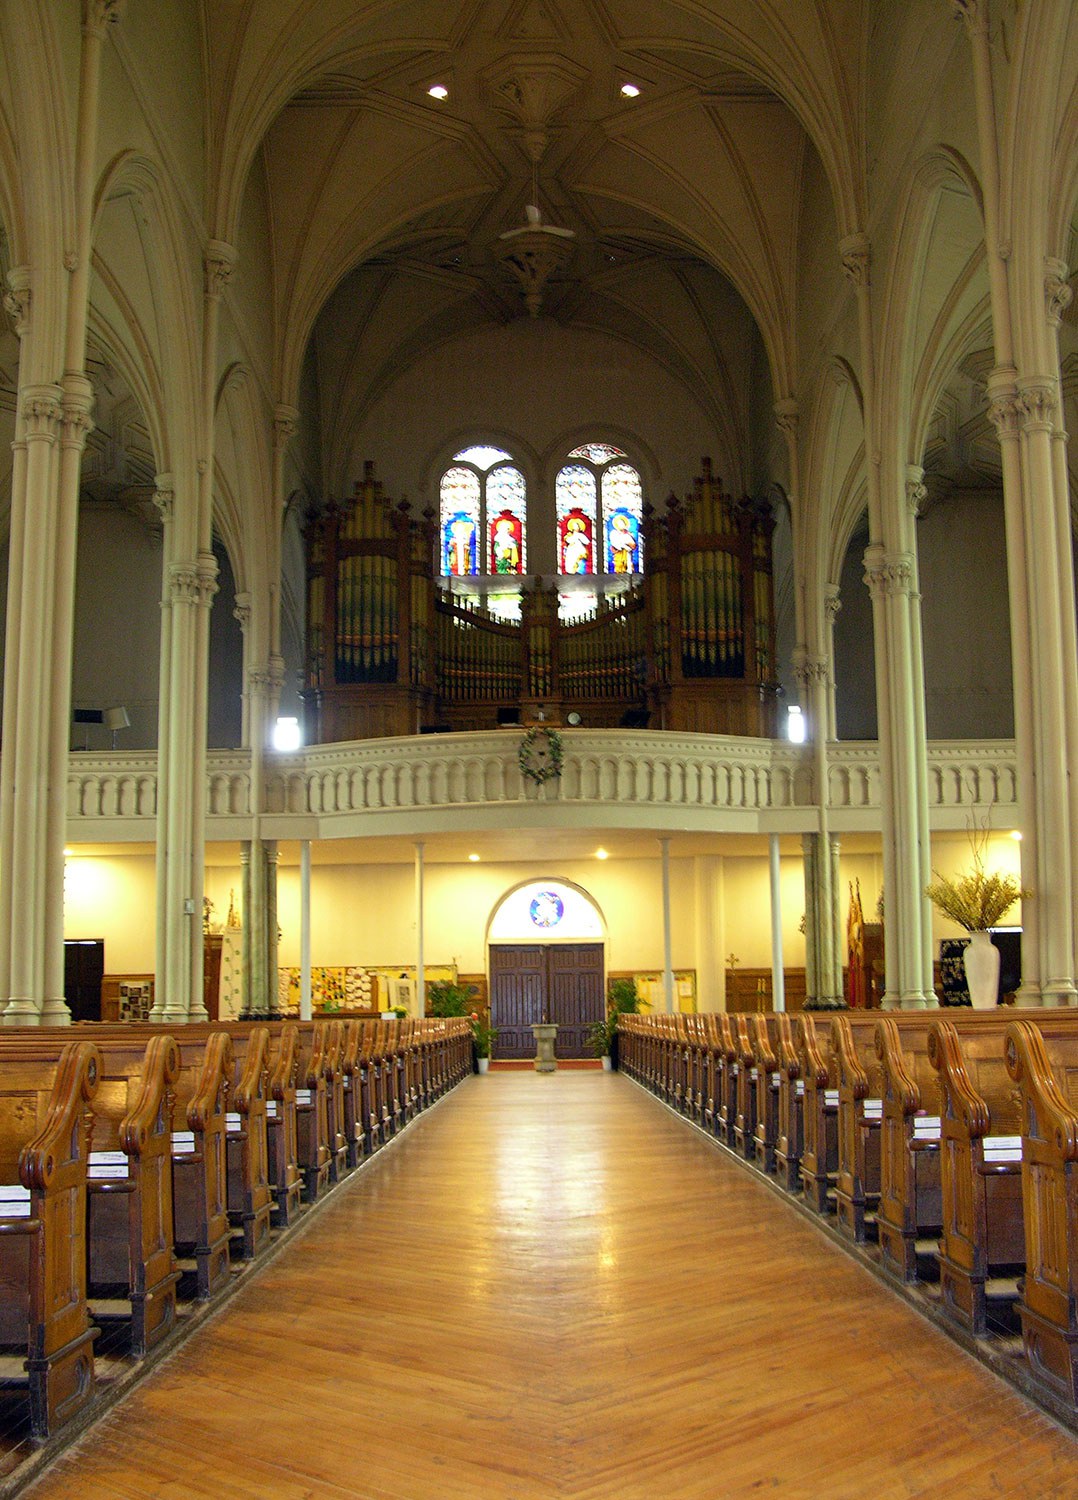 Churches have also been successfully converted into theatres. St. Brigid’s Church in Ottawa (shown here) recently found new use hosting various public performances within its walls..